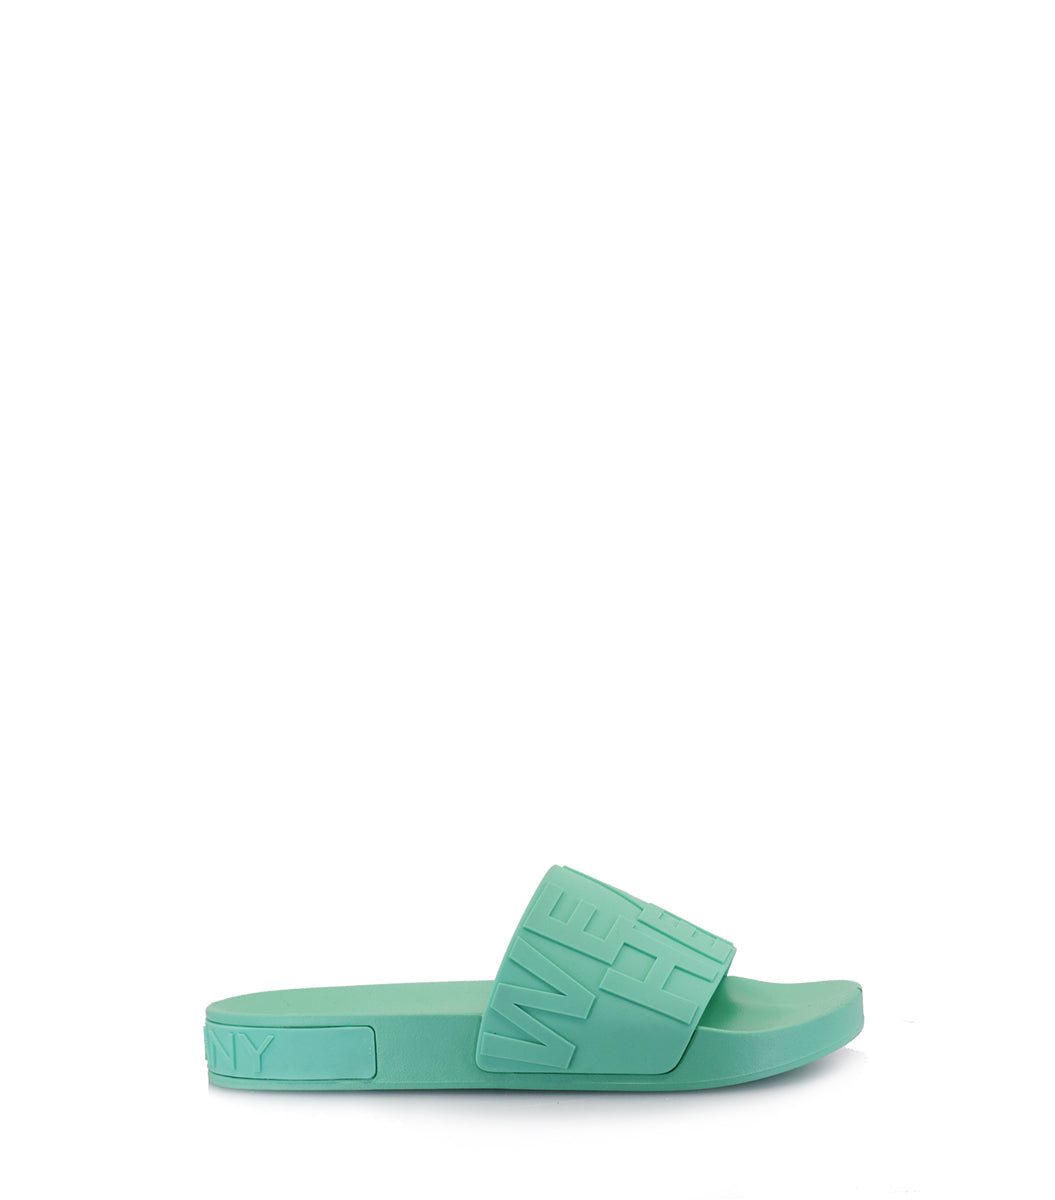 HERE GREEN SANDALS